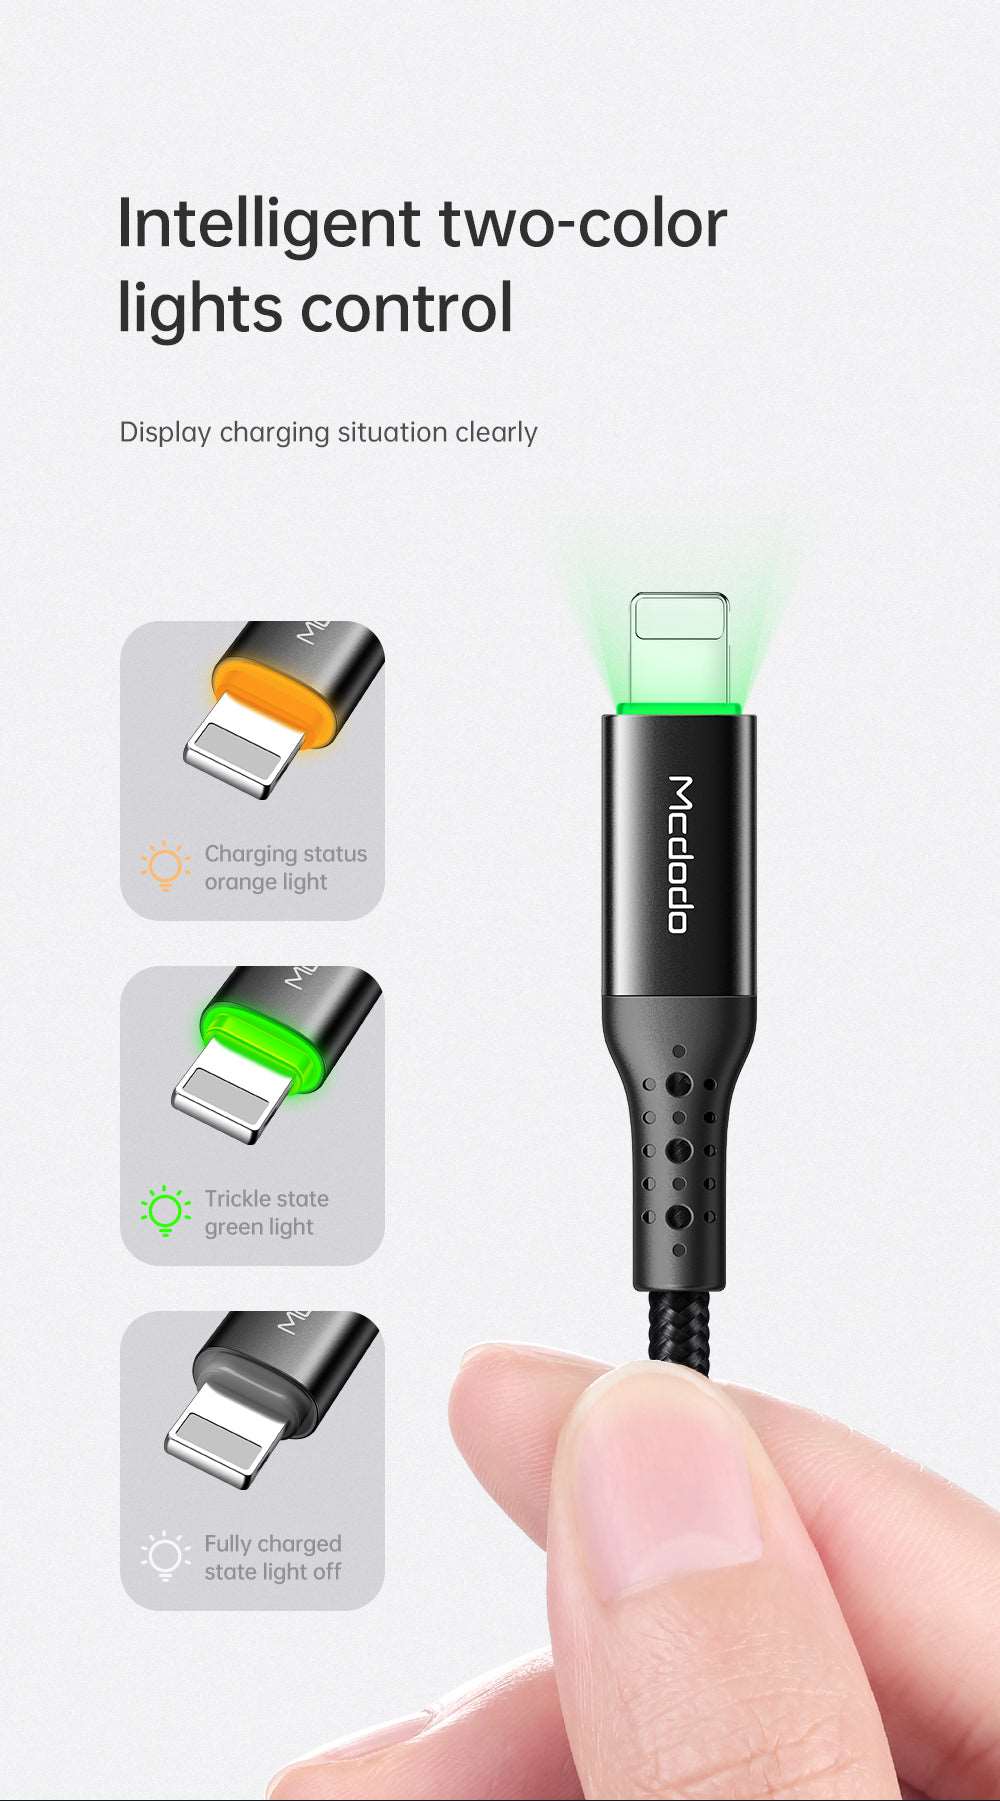 Mcdodo CA-741 | USB to Lightning Mobile Cable | Auto Power Off Mobile Cable Store